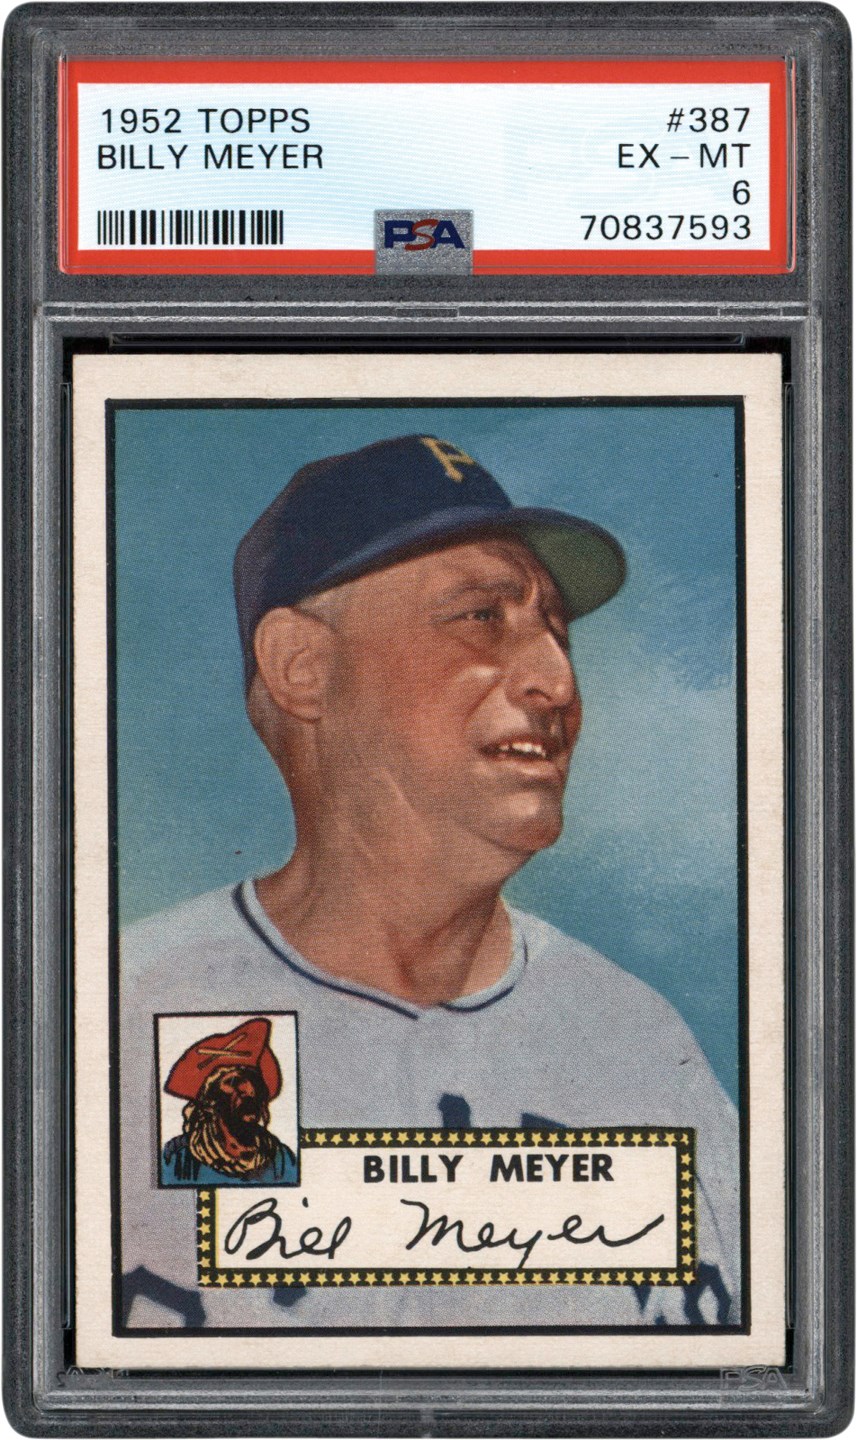 1952 Topps #387 Billy Meyer PSA EX-MT 6 - Newly Discovered Example